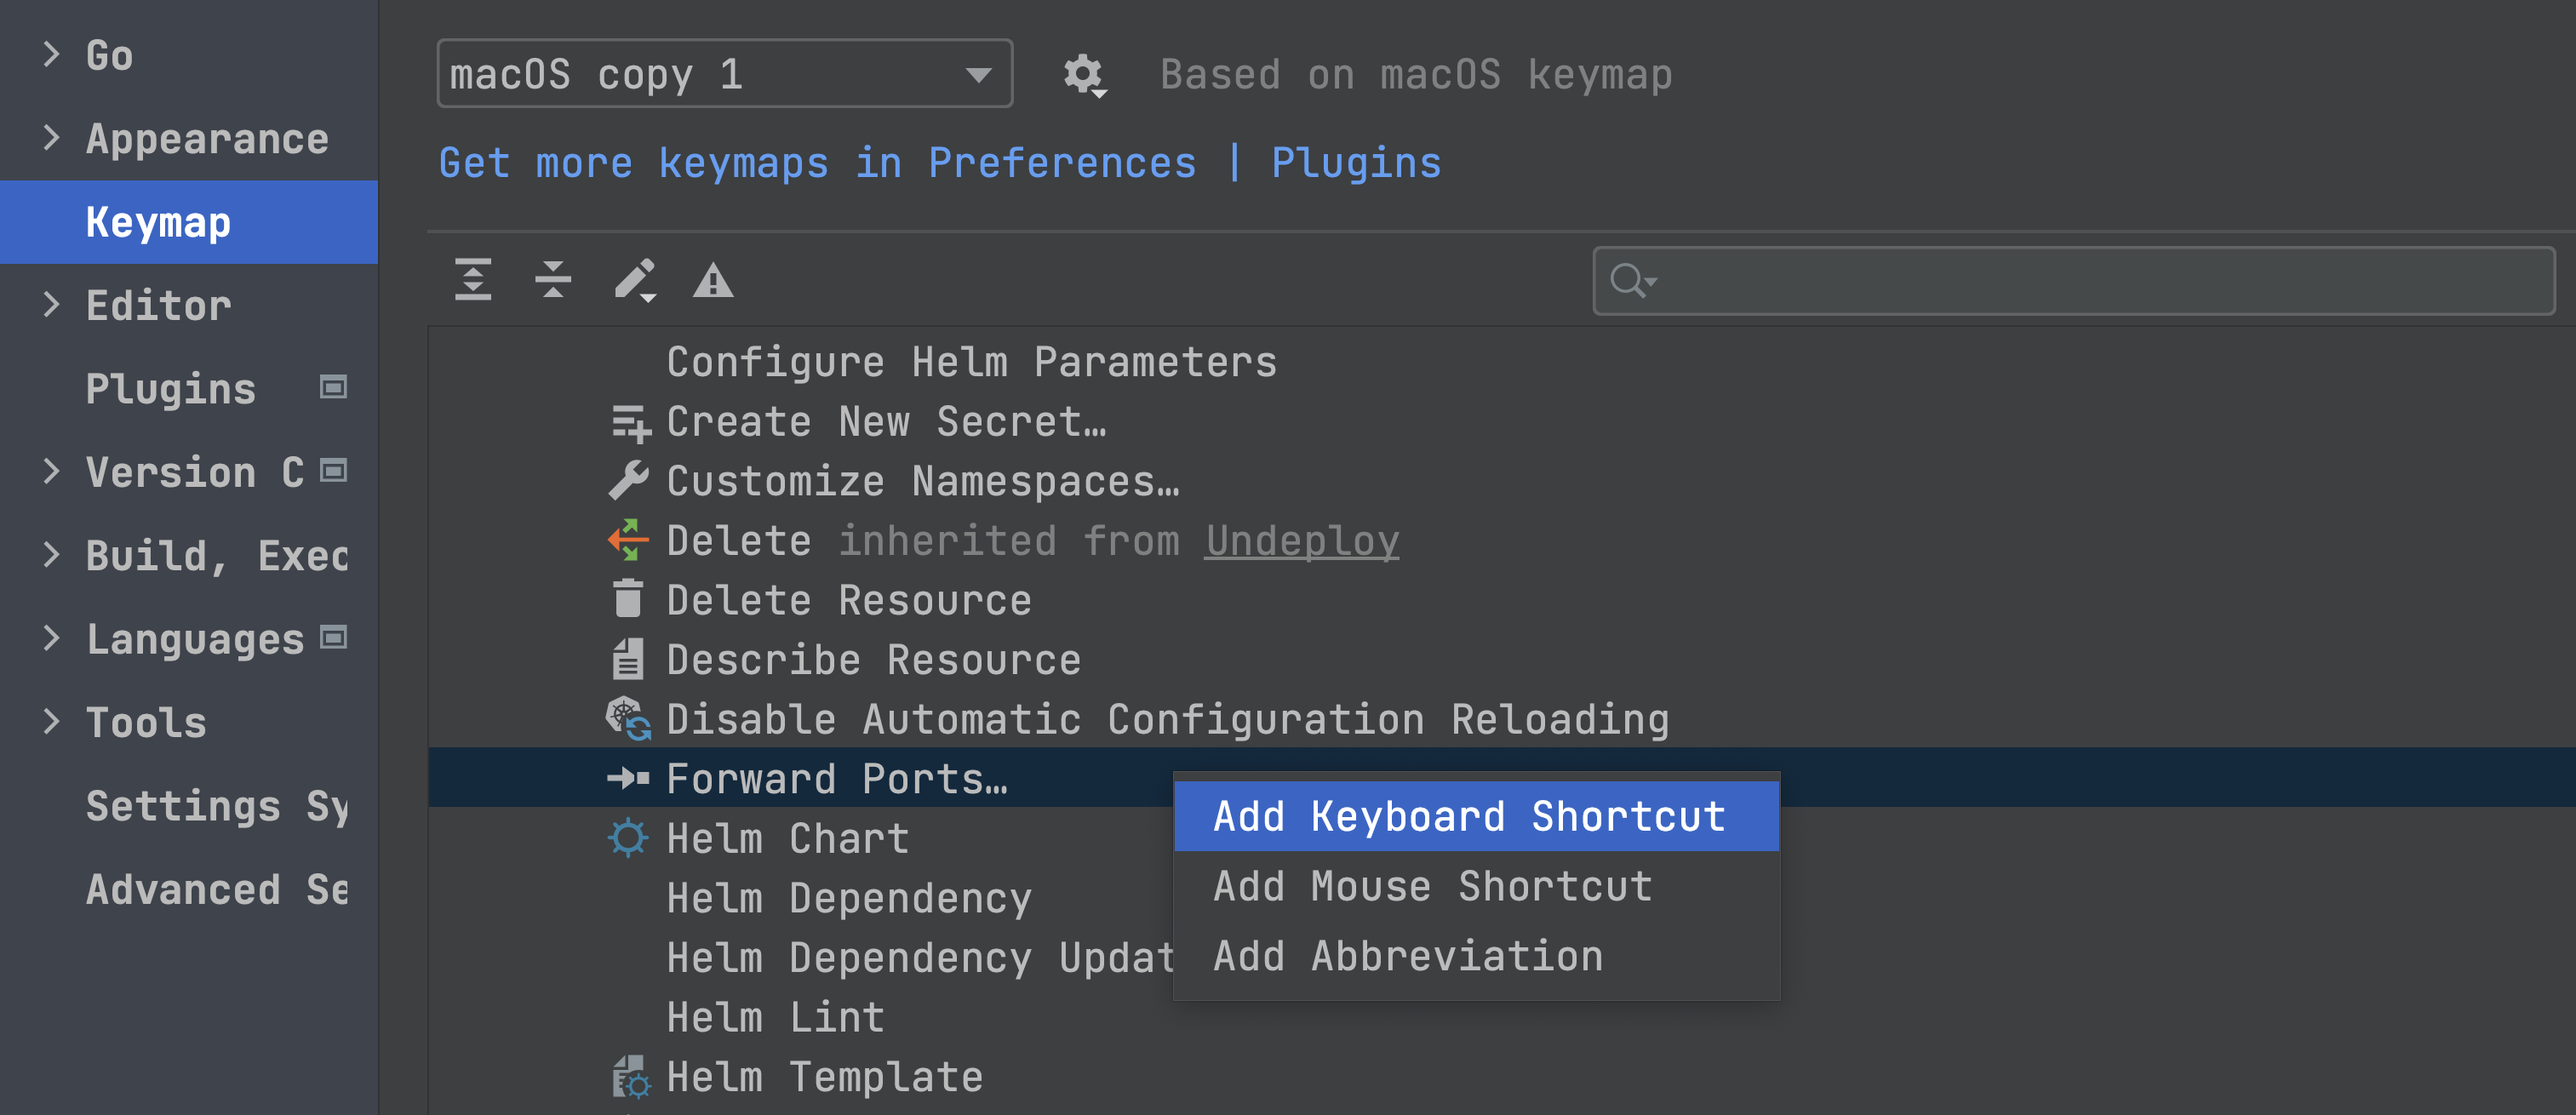 Assigning a shortcut to the Forward Ports action